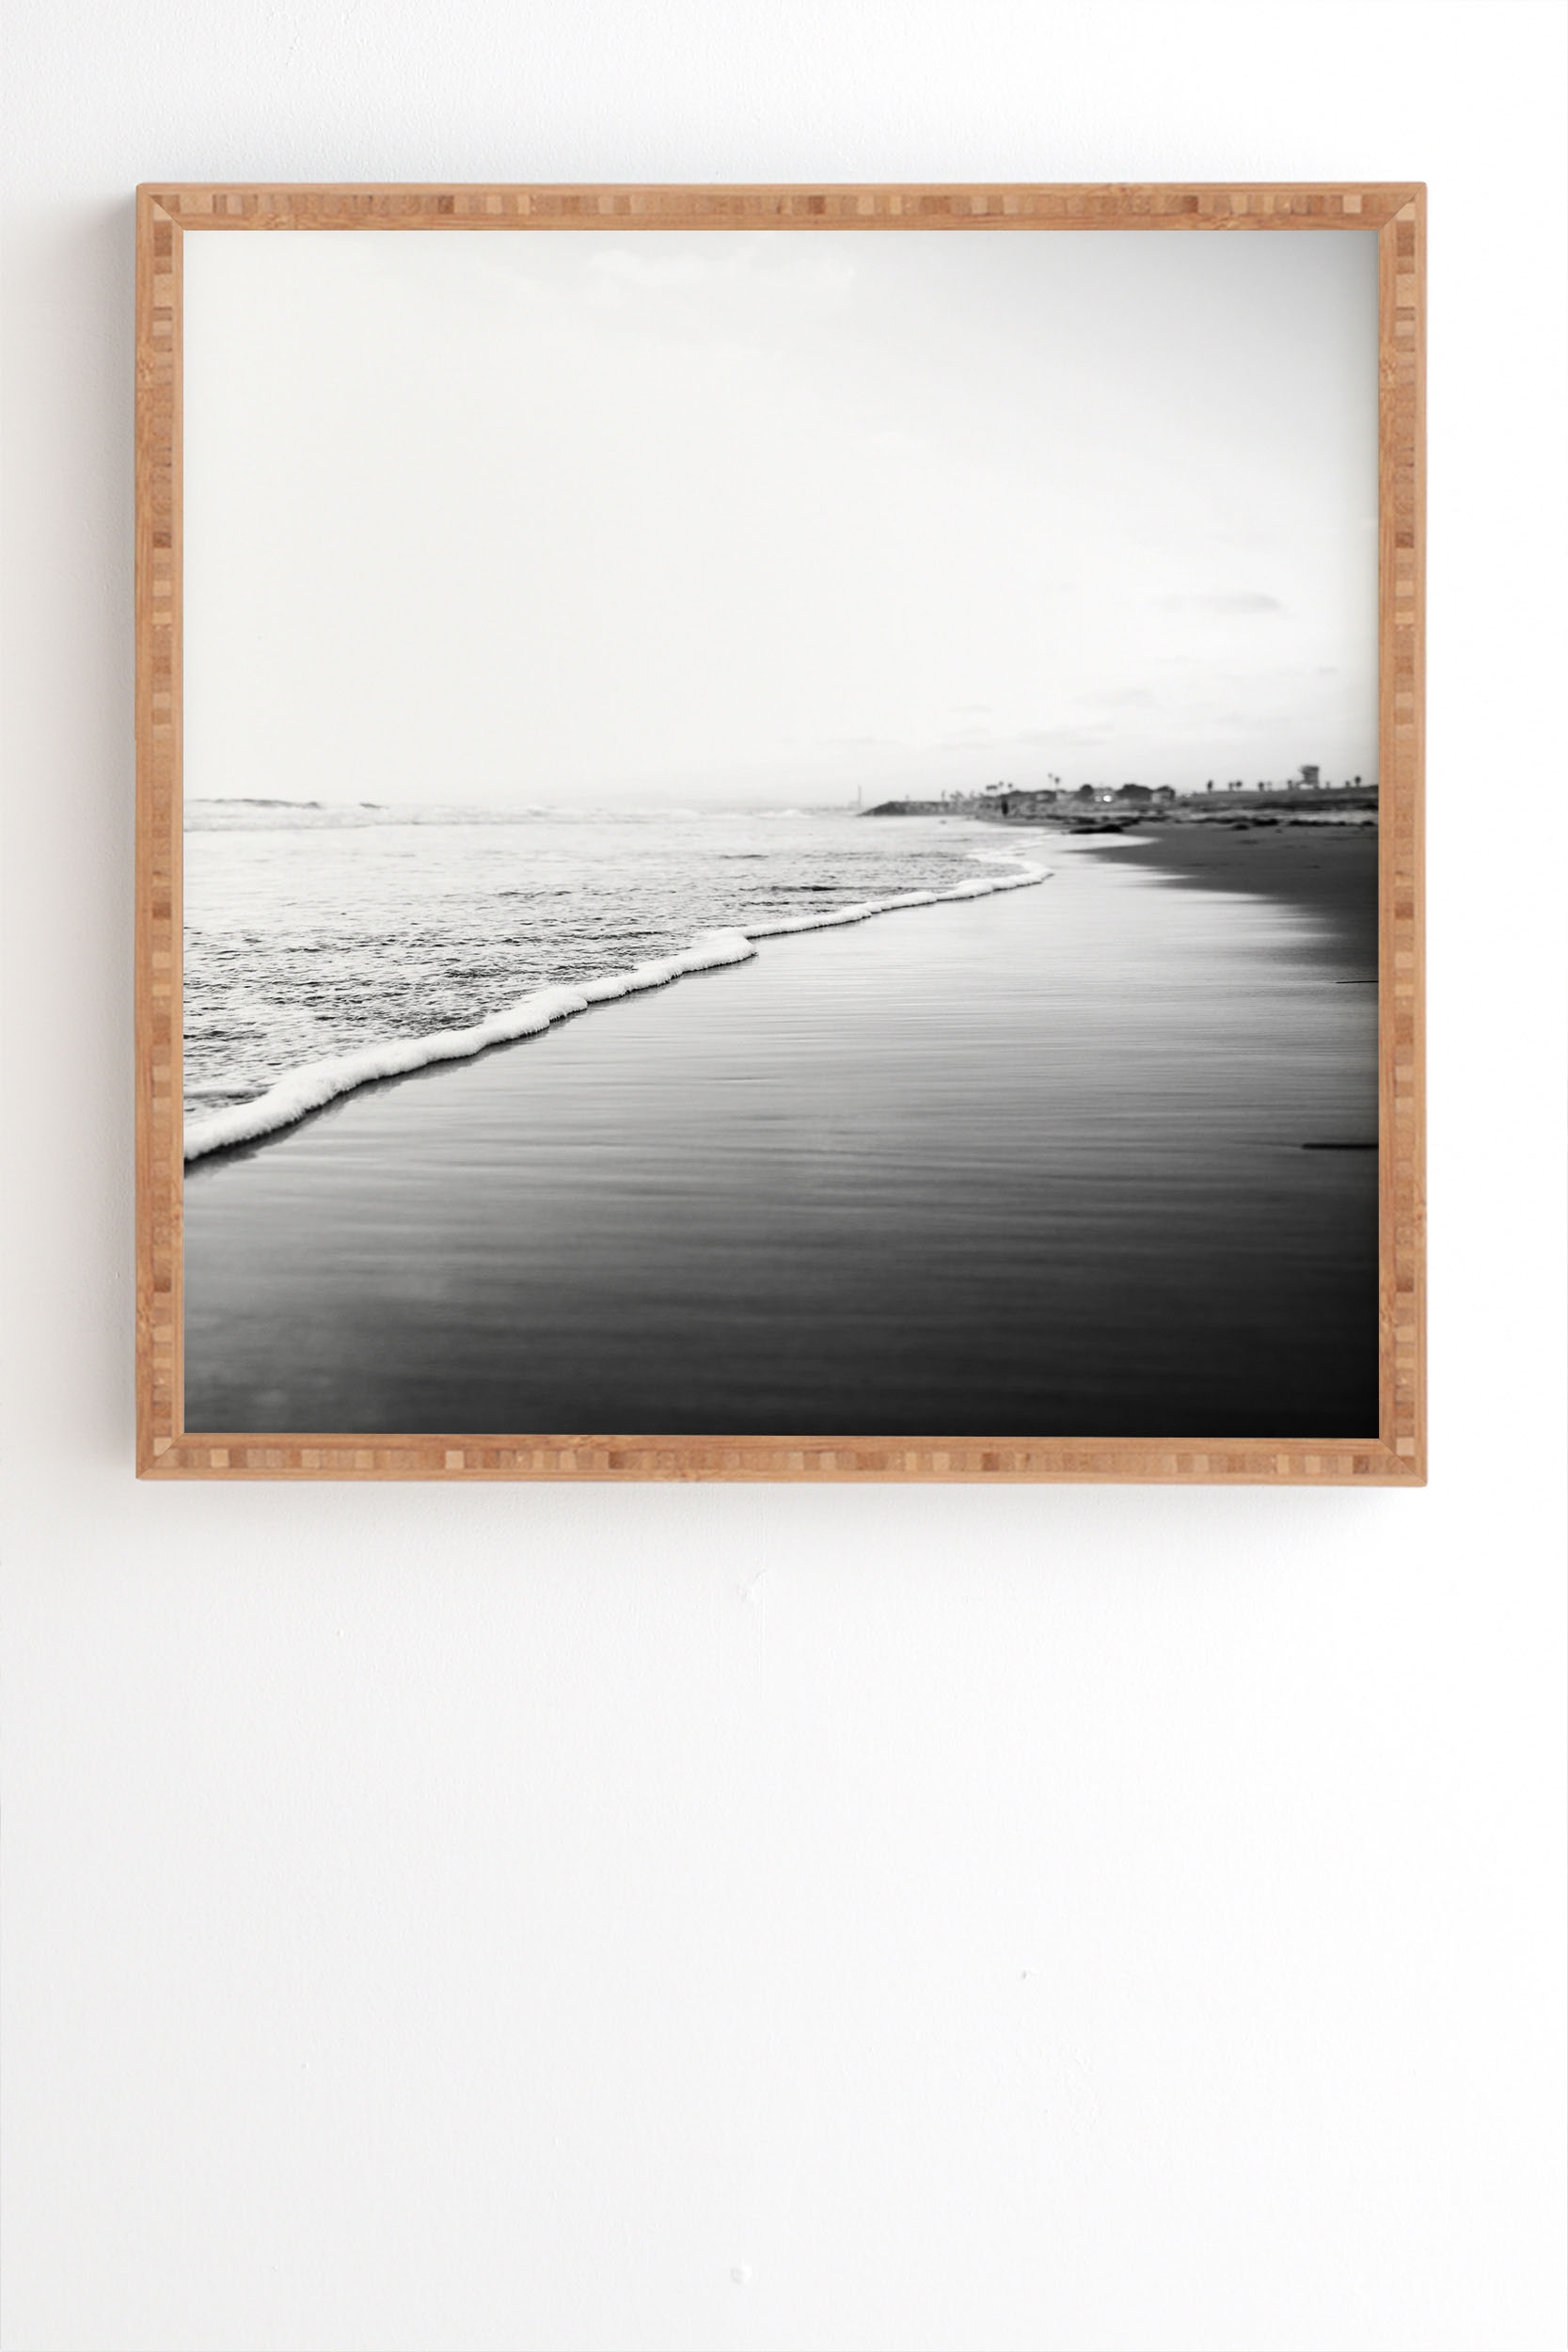 Changing Tides by Bree Madden - Framed Wall Art Bamboo 20" x 20" - Image 1